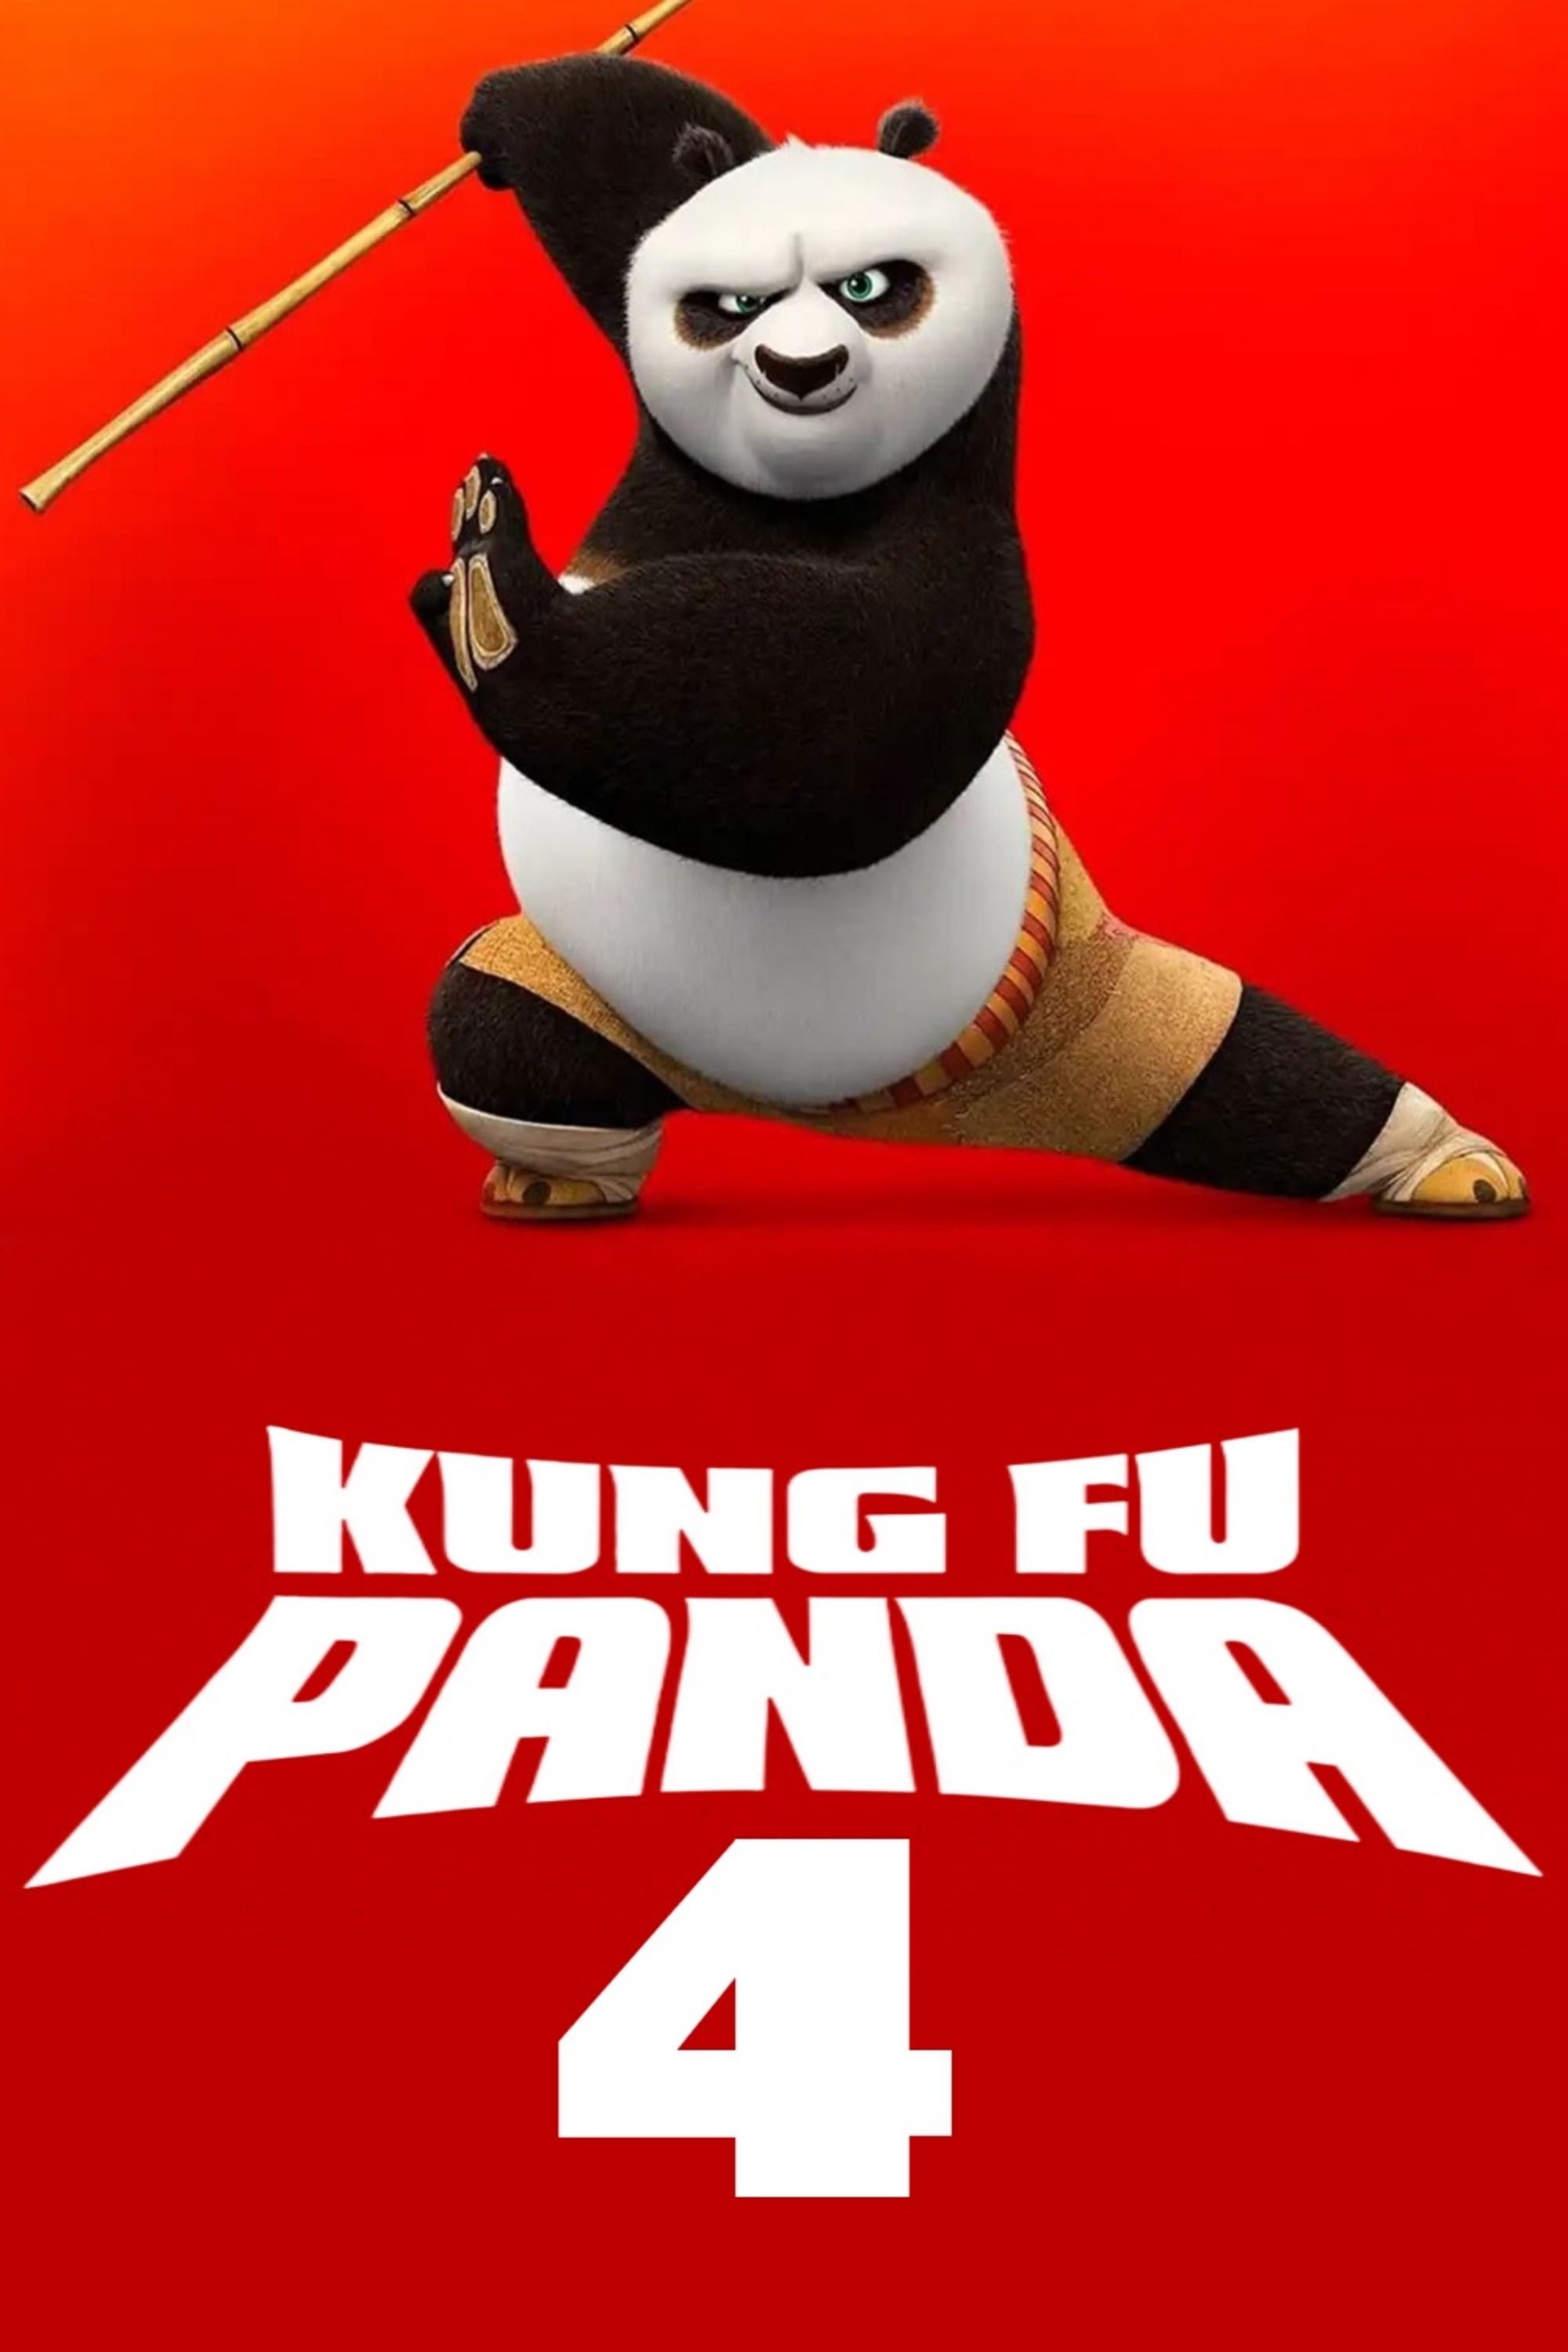 Kung Fu Panda 4 Gets First Trailer From DreamWorks